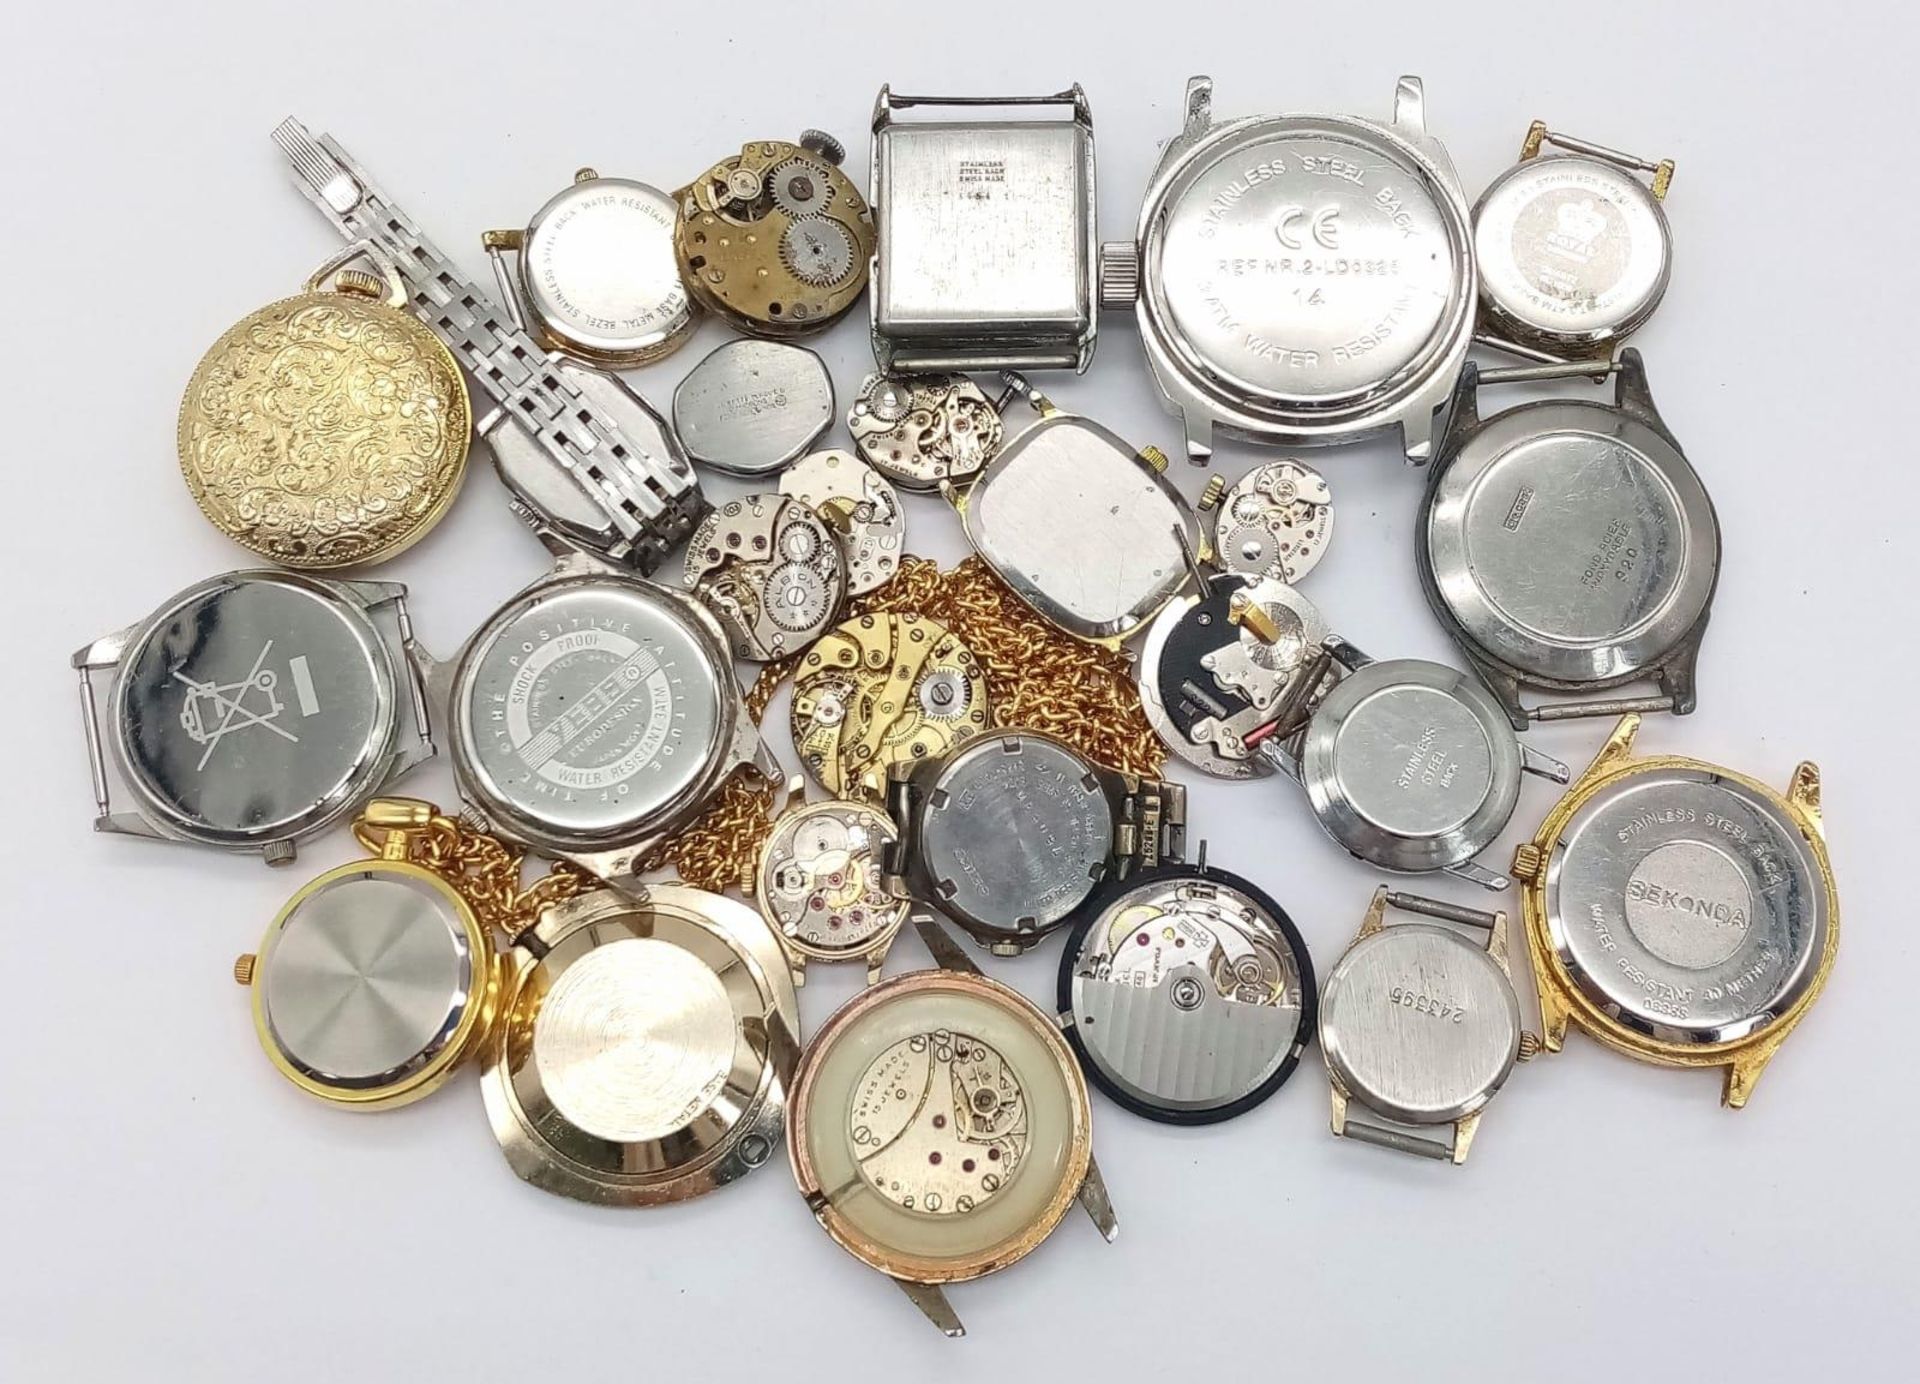 18 Watch Cases with Movements PLUS Nine Loose Watch Movements. Great for spare parts. - Image 2 of 3